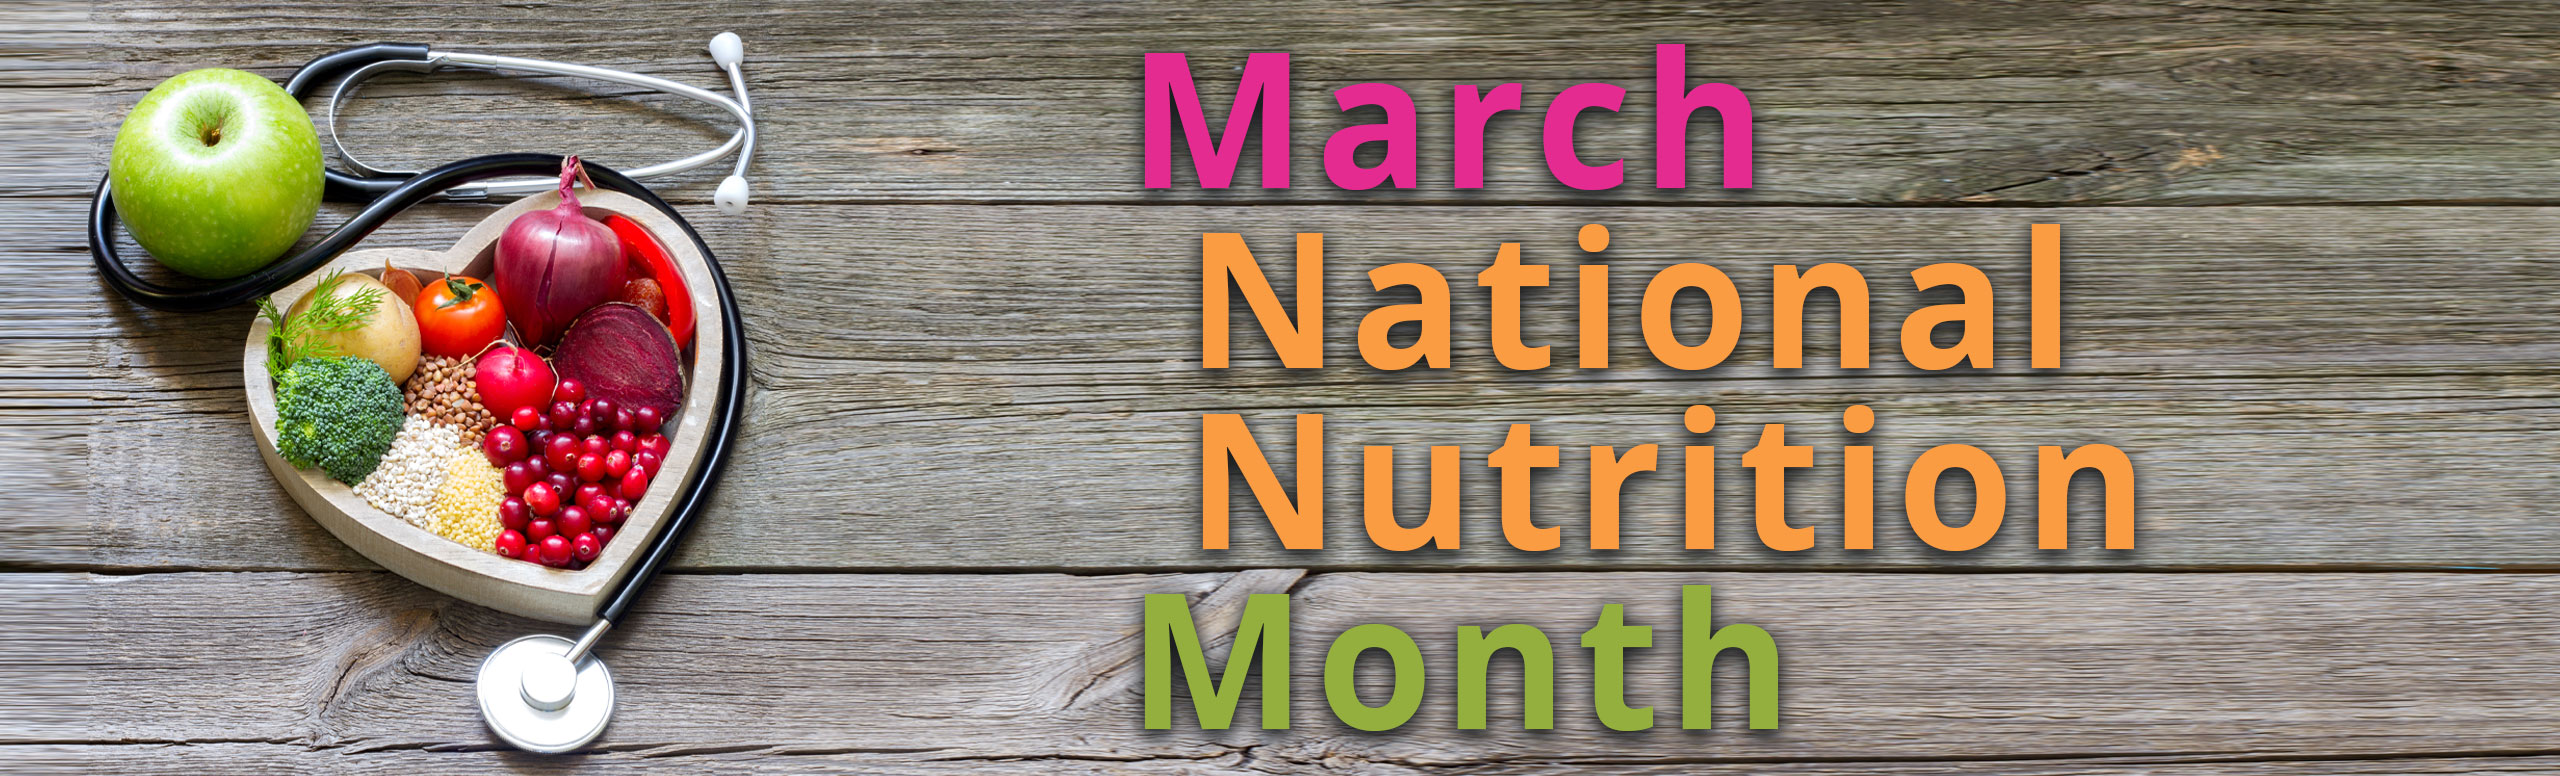 Banner picture of a heart shaped dish with veggies , rice, and grains. There is an apple next to it with a stethoscope. Banner says:
March National Nutrition Month